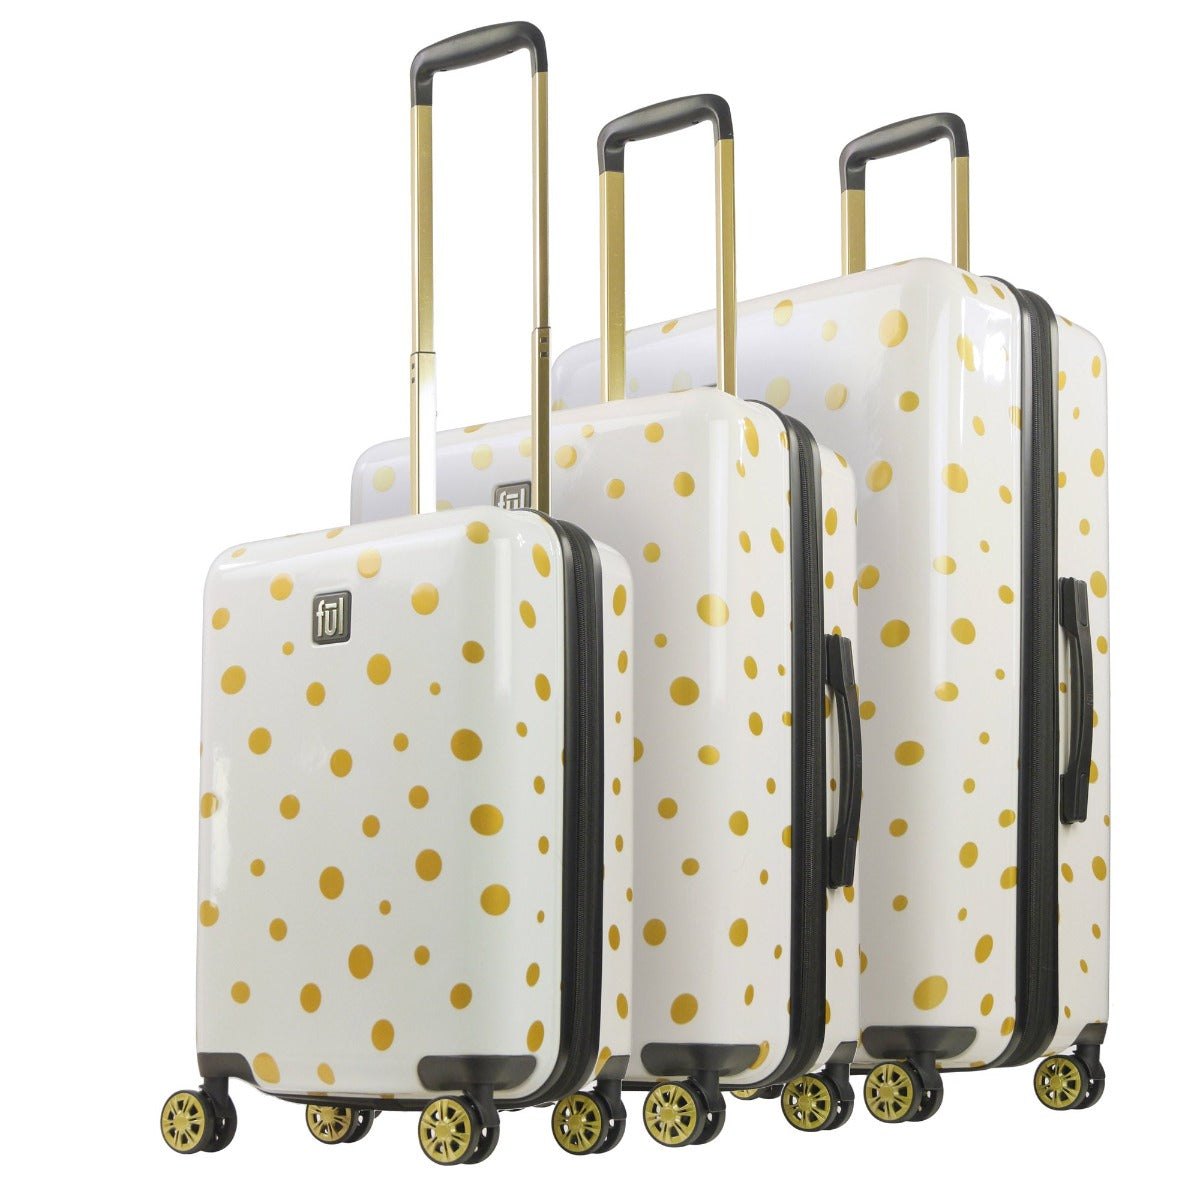 Ful Impulse Mixed Dots Hardsided Spinners suitcase 3 piece luggage set white gold detail polka dots